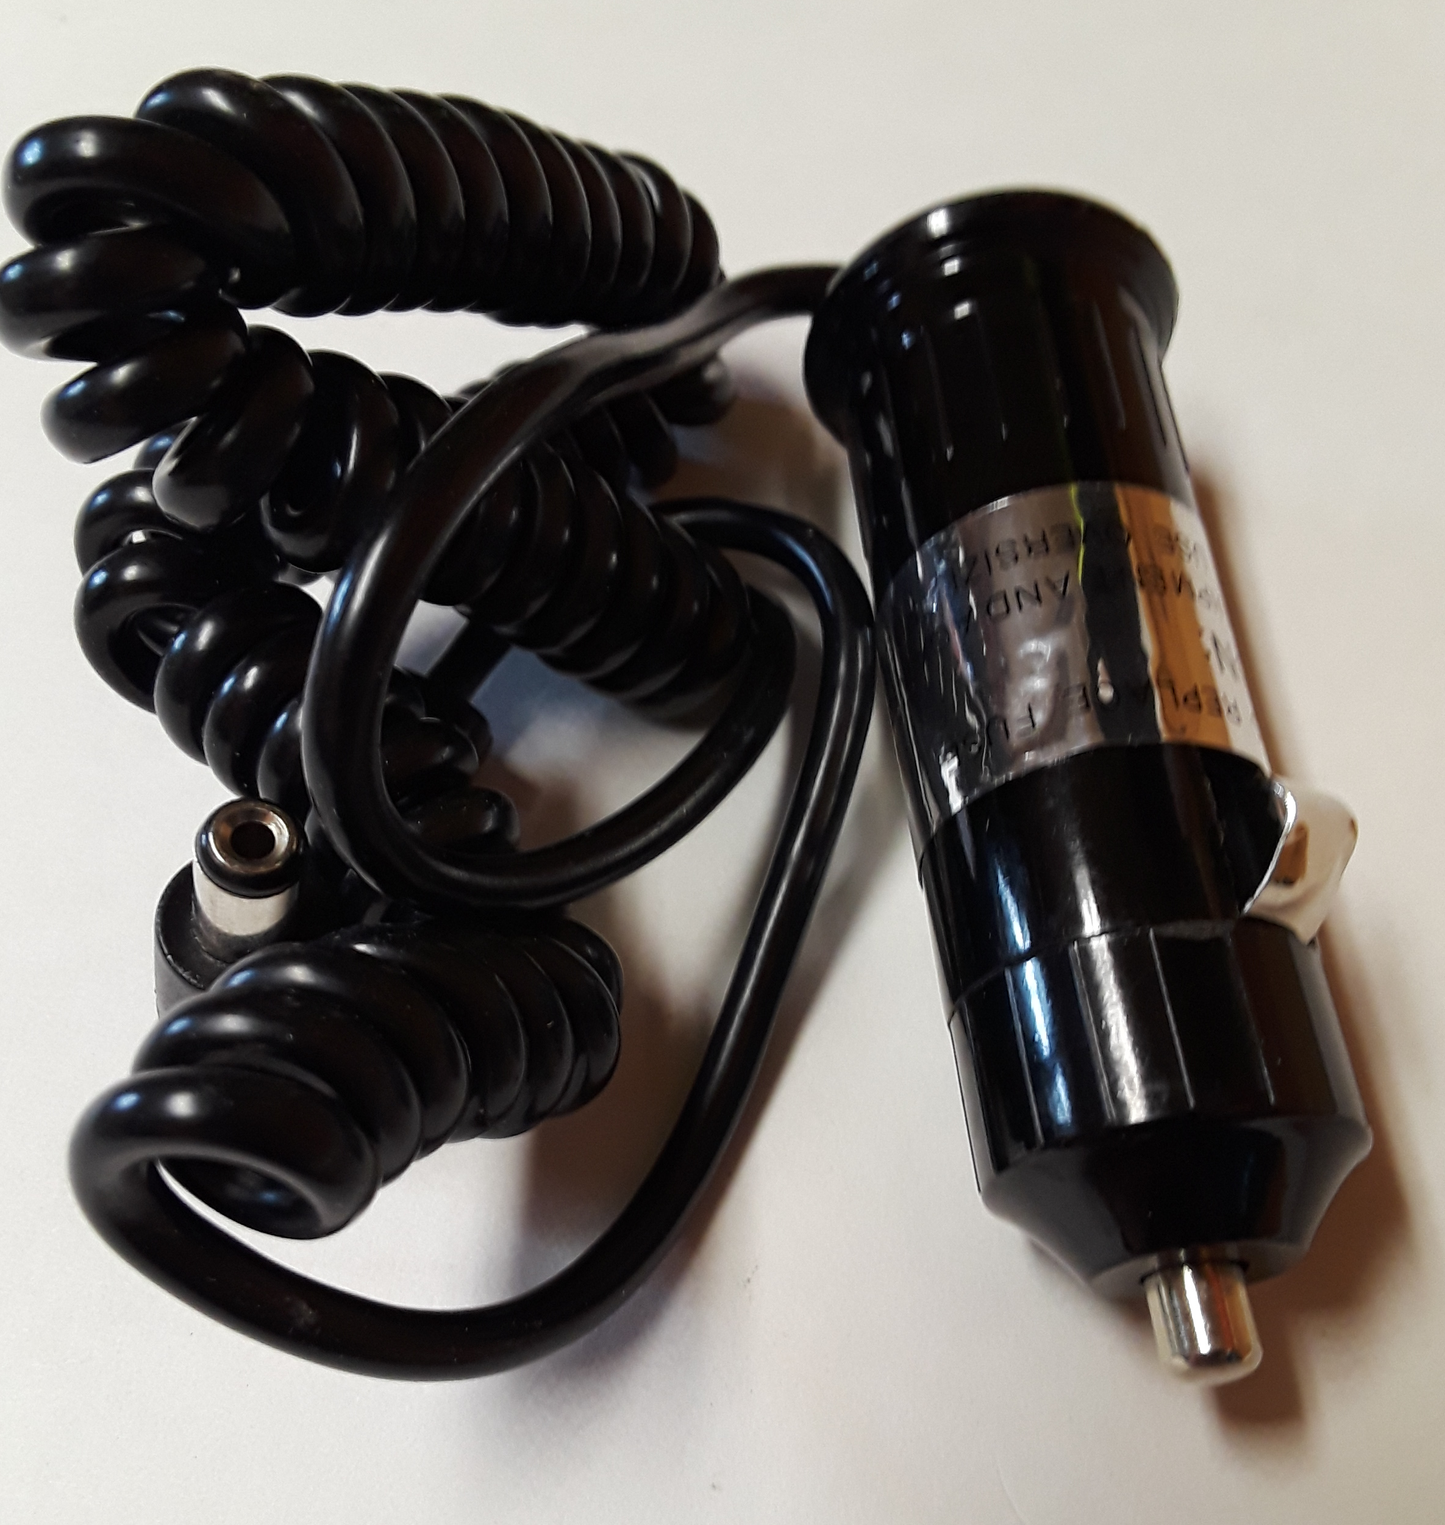 Charger For Hand-Held Radios, 12 Volt, coiled wire